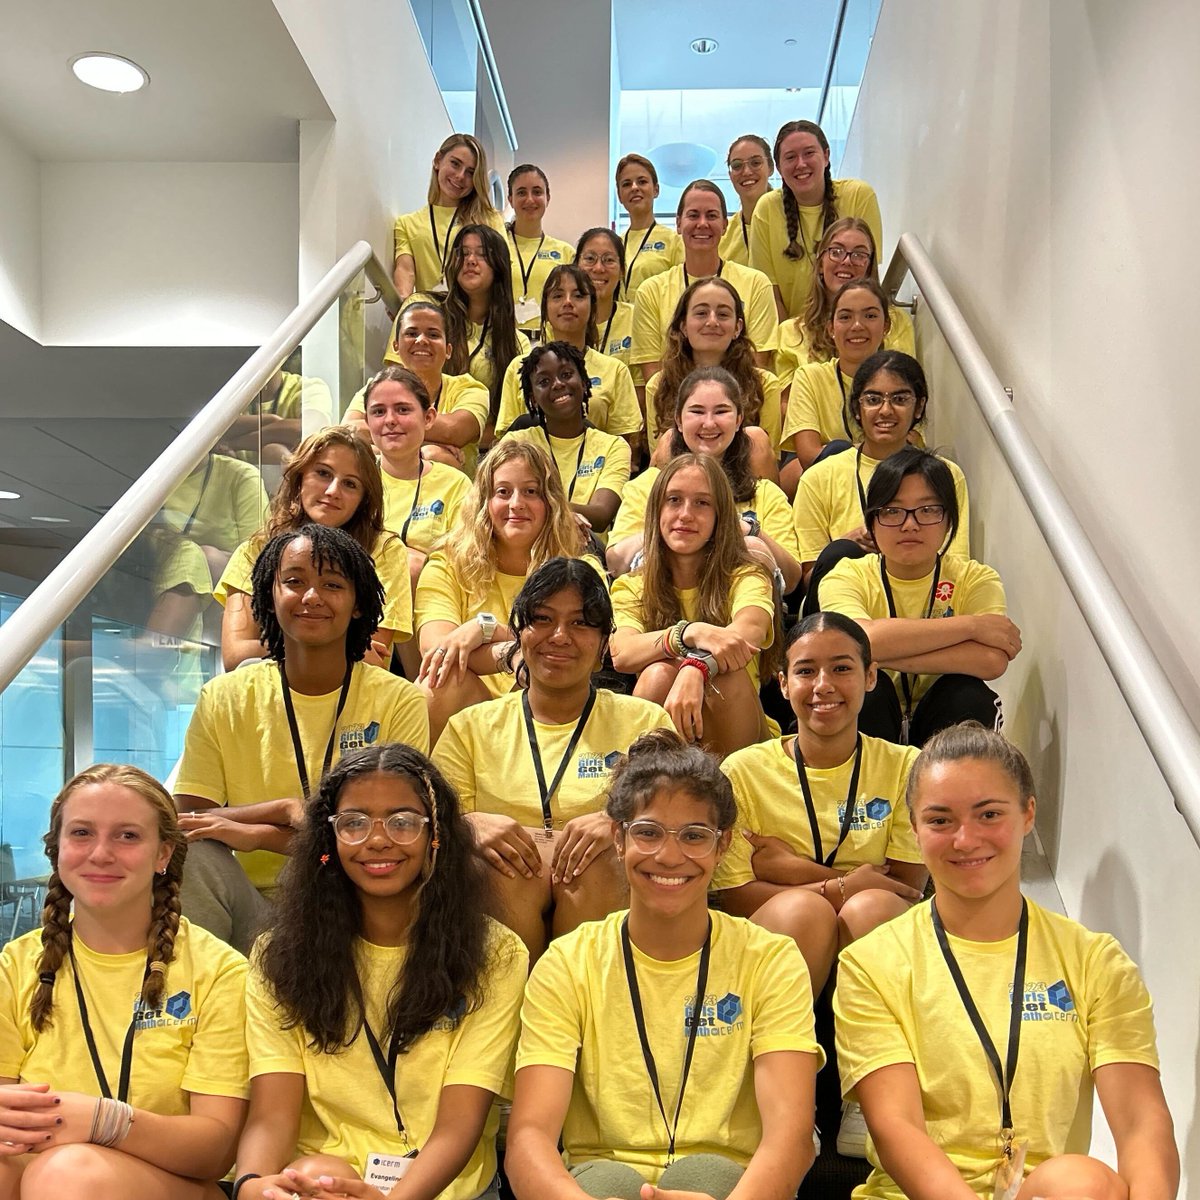 ICERM is accepting applications for GirlsGetMath@ICERM 2024! GirlsGetMath is a five-day non-residential program for students in or near Providence, RI to explore mathematics in an open and encouraging setting led by faculty mentors. Learn more at icerm.brown.edu/girlsgetmath/2….